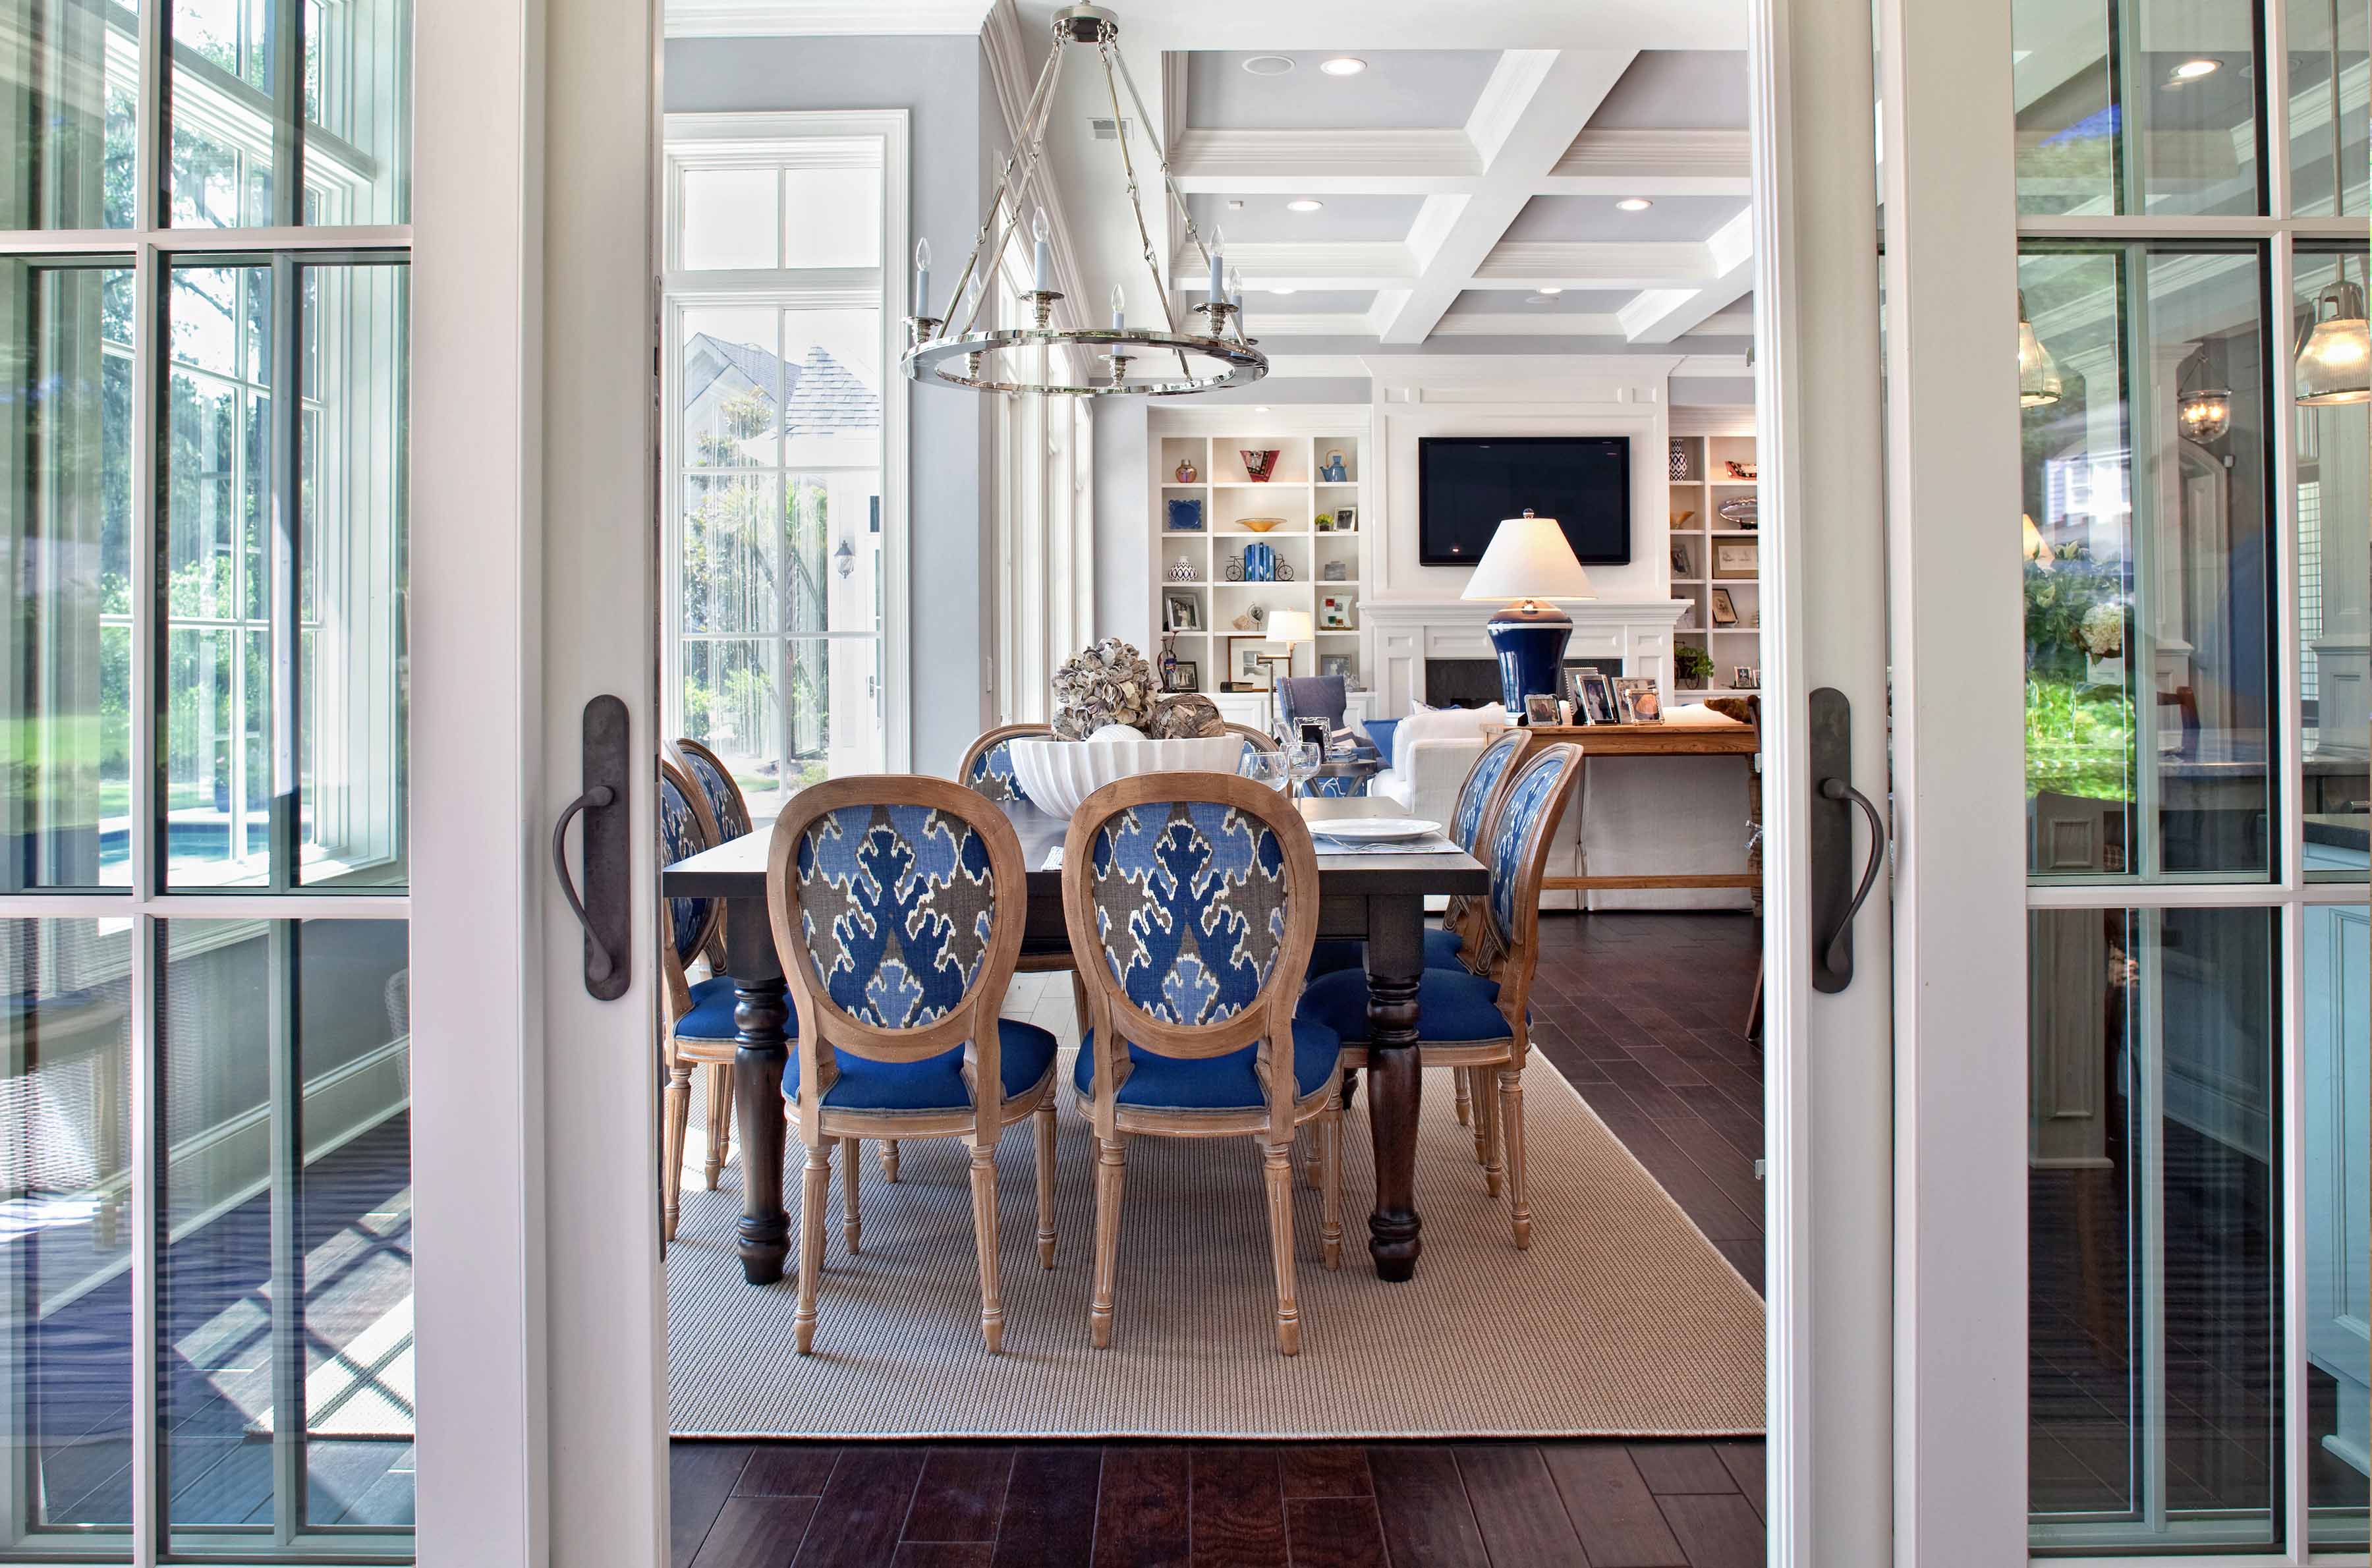 hilton head interior design firm j banks design group understands coastal style as is illustrated by this home by Hannah Fulton Toney